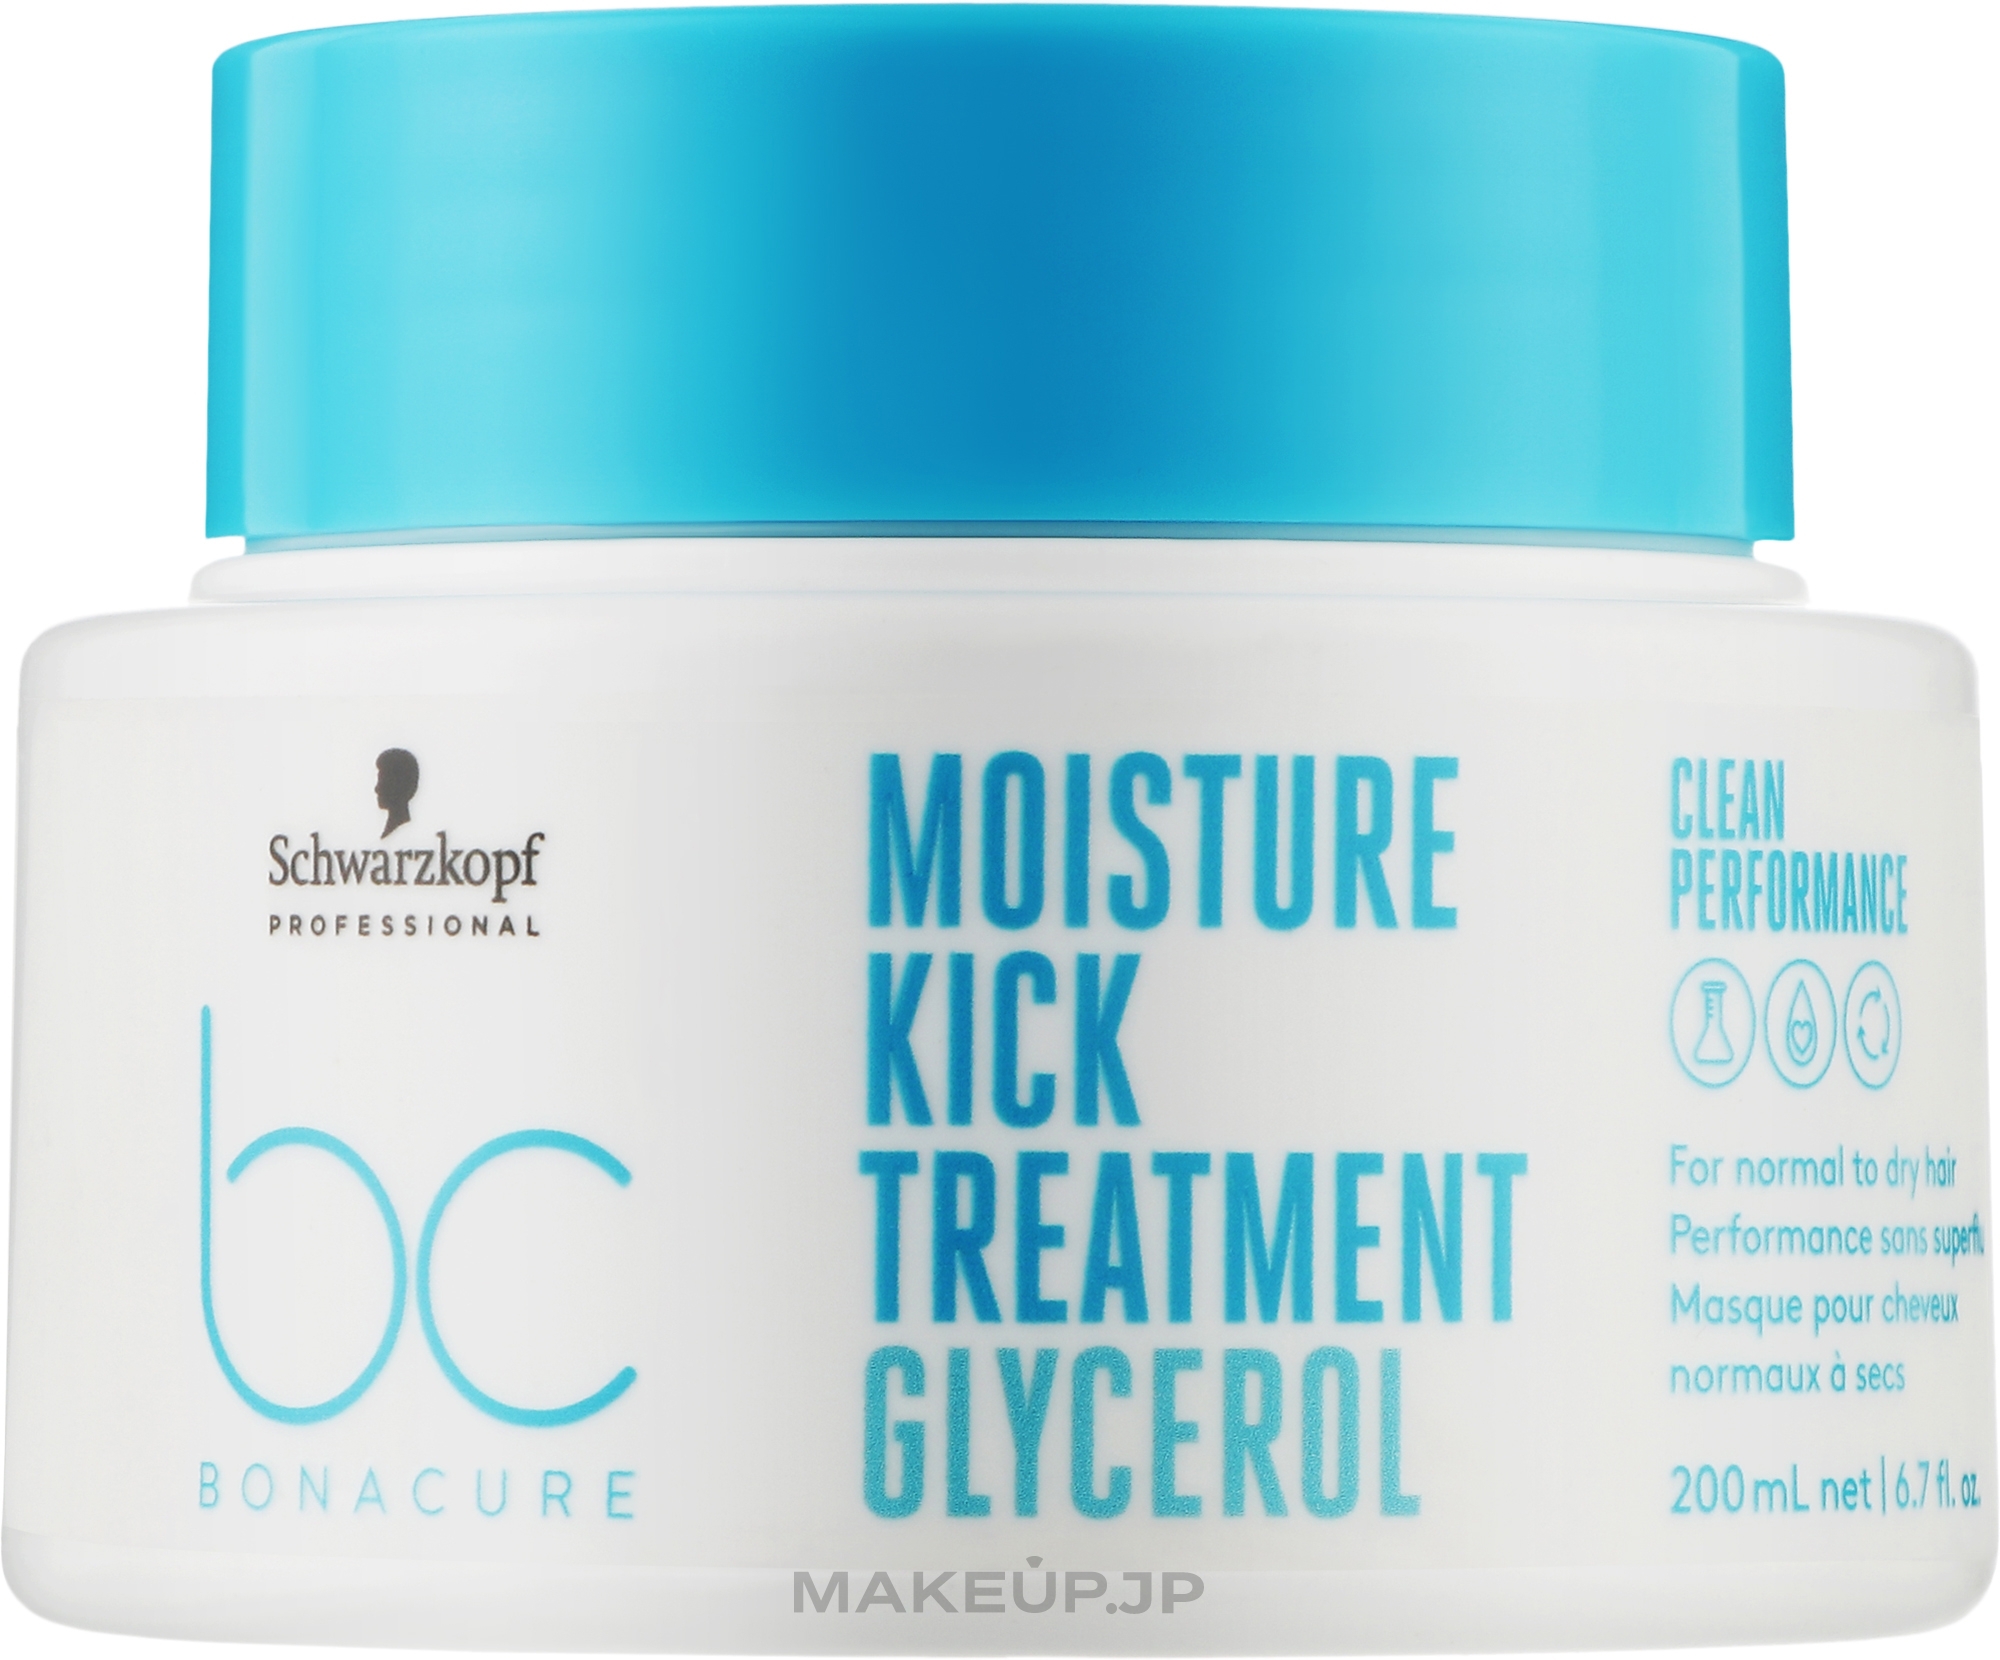 Mask for Normal and Dry Hair - Schwarzkopf Professional Bonacure Moisture Kick Treatment Glycerol — photo 200 ml